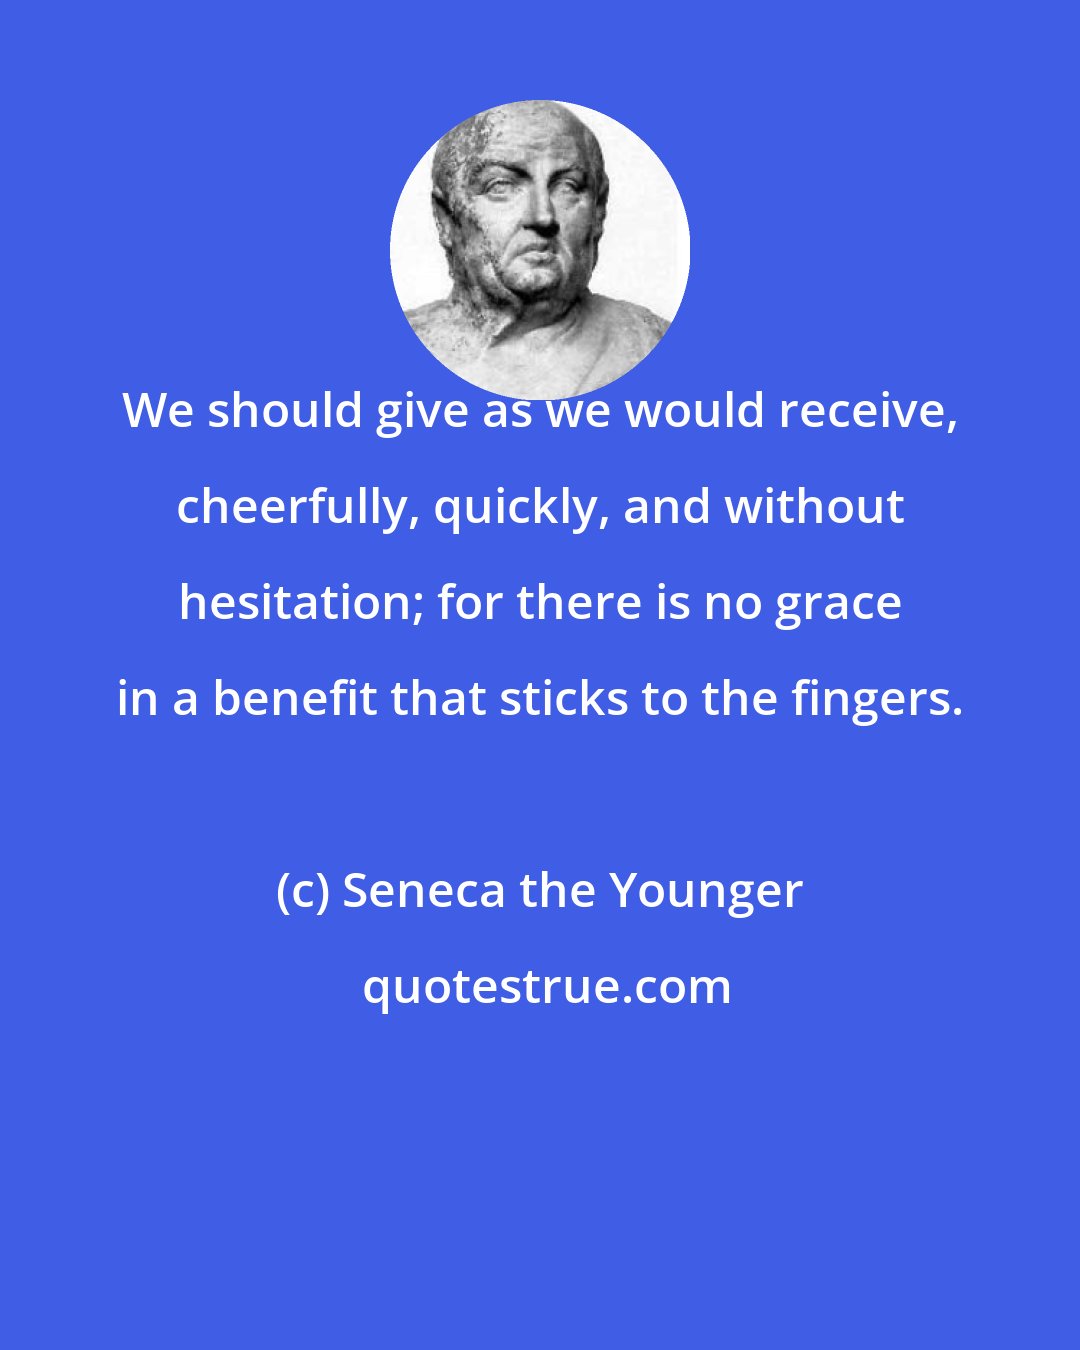 Seneca the Younger: We should give as we would receive, cheerfully, quickly, and without hesitation; for there is no grace in a benefit that sticks to the fingers.